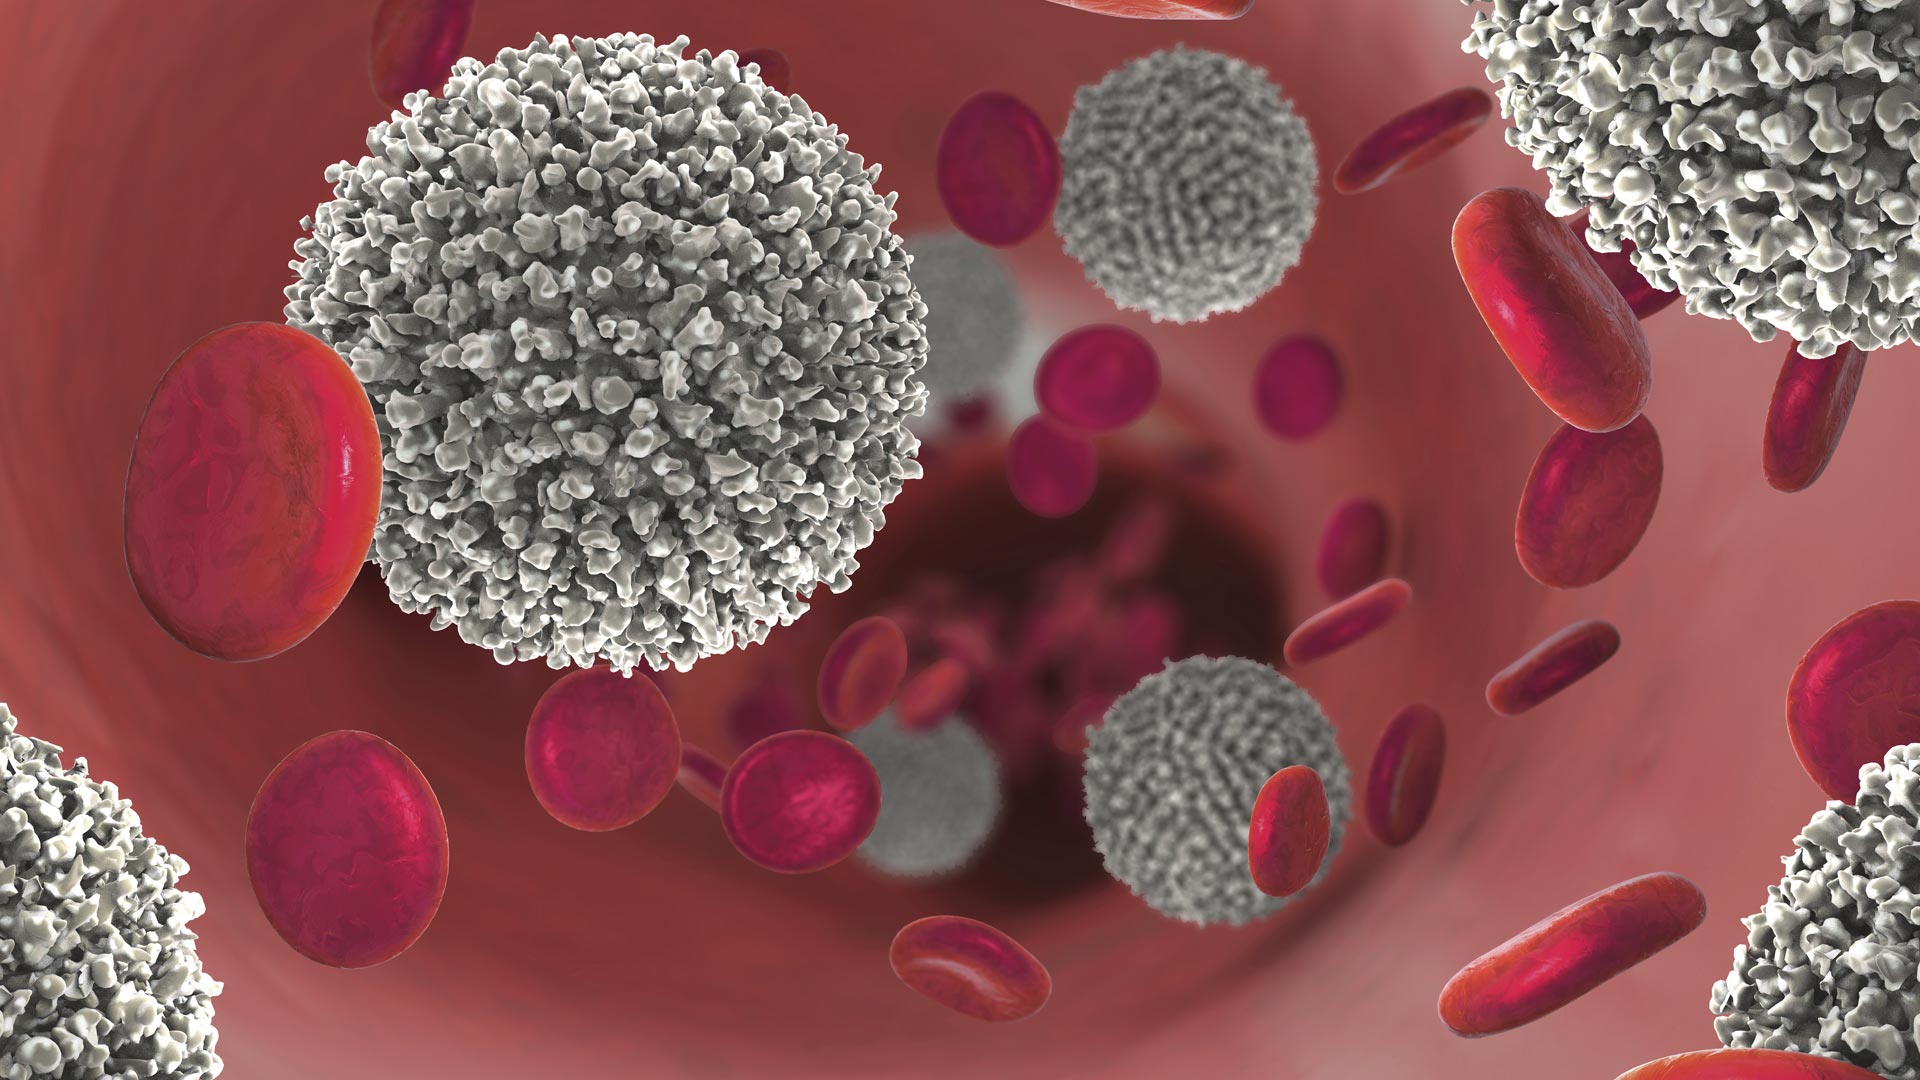 Progress in Understanding and Preventing Blood Cancer